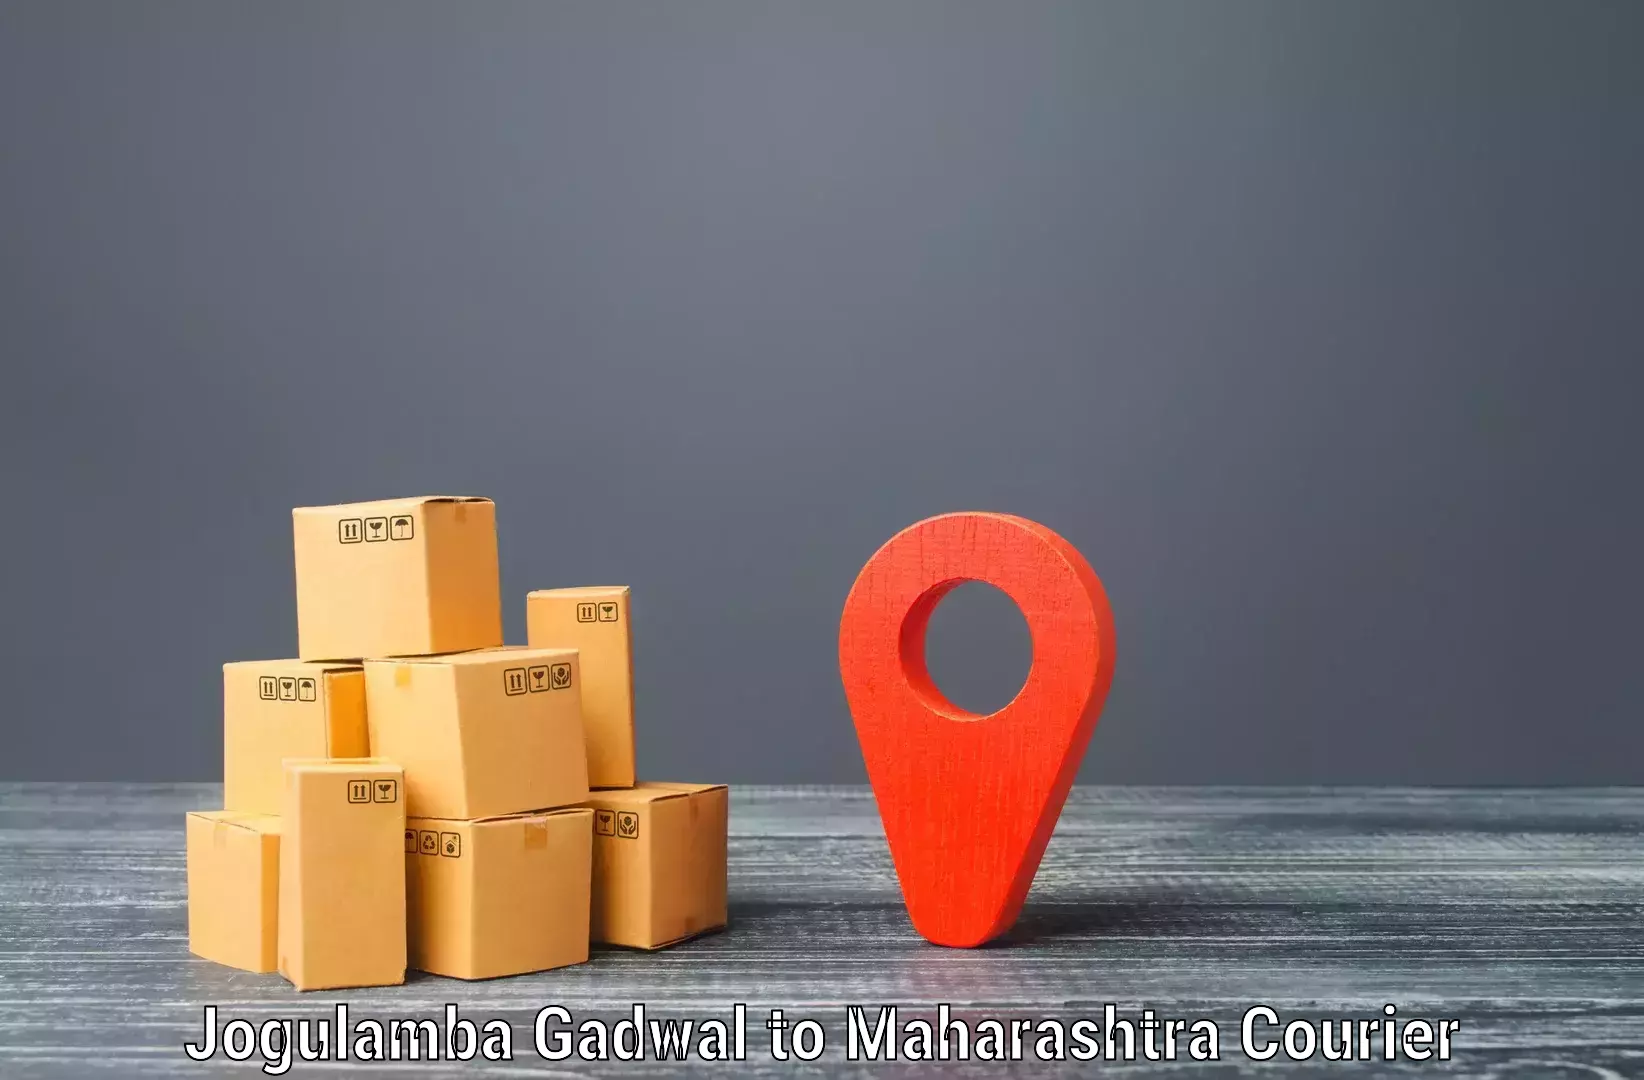 Package delivery network Jogulamba Gadwal to Panvel